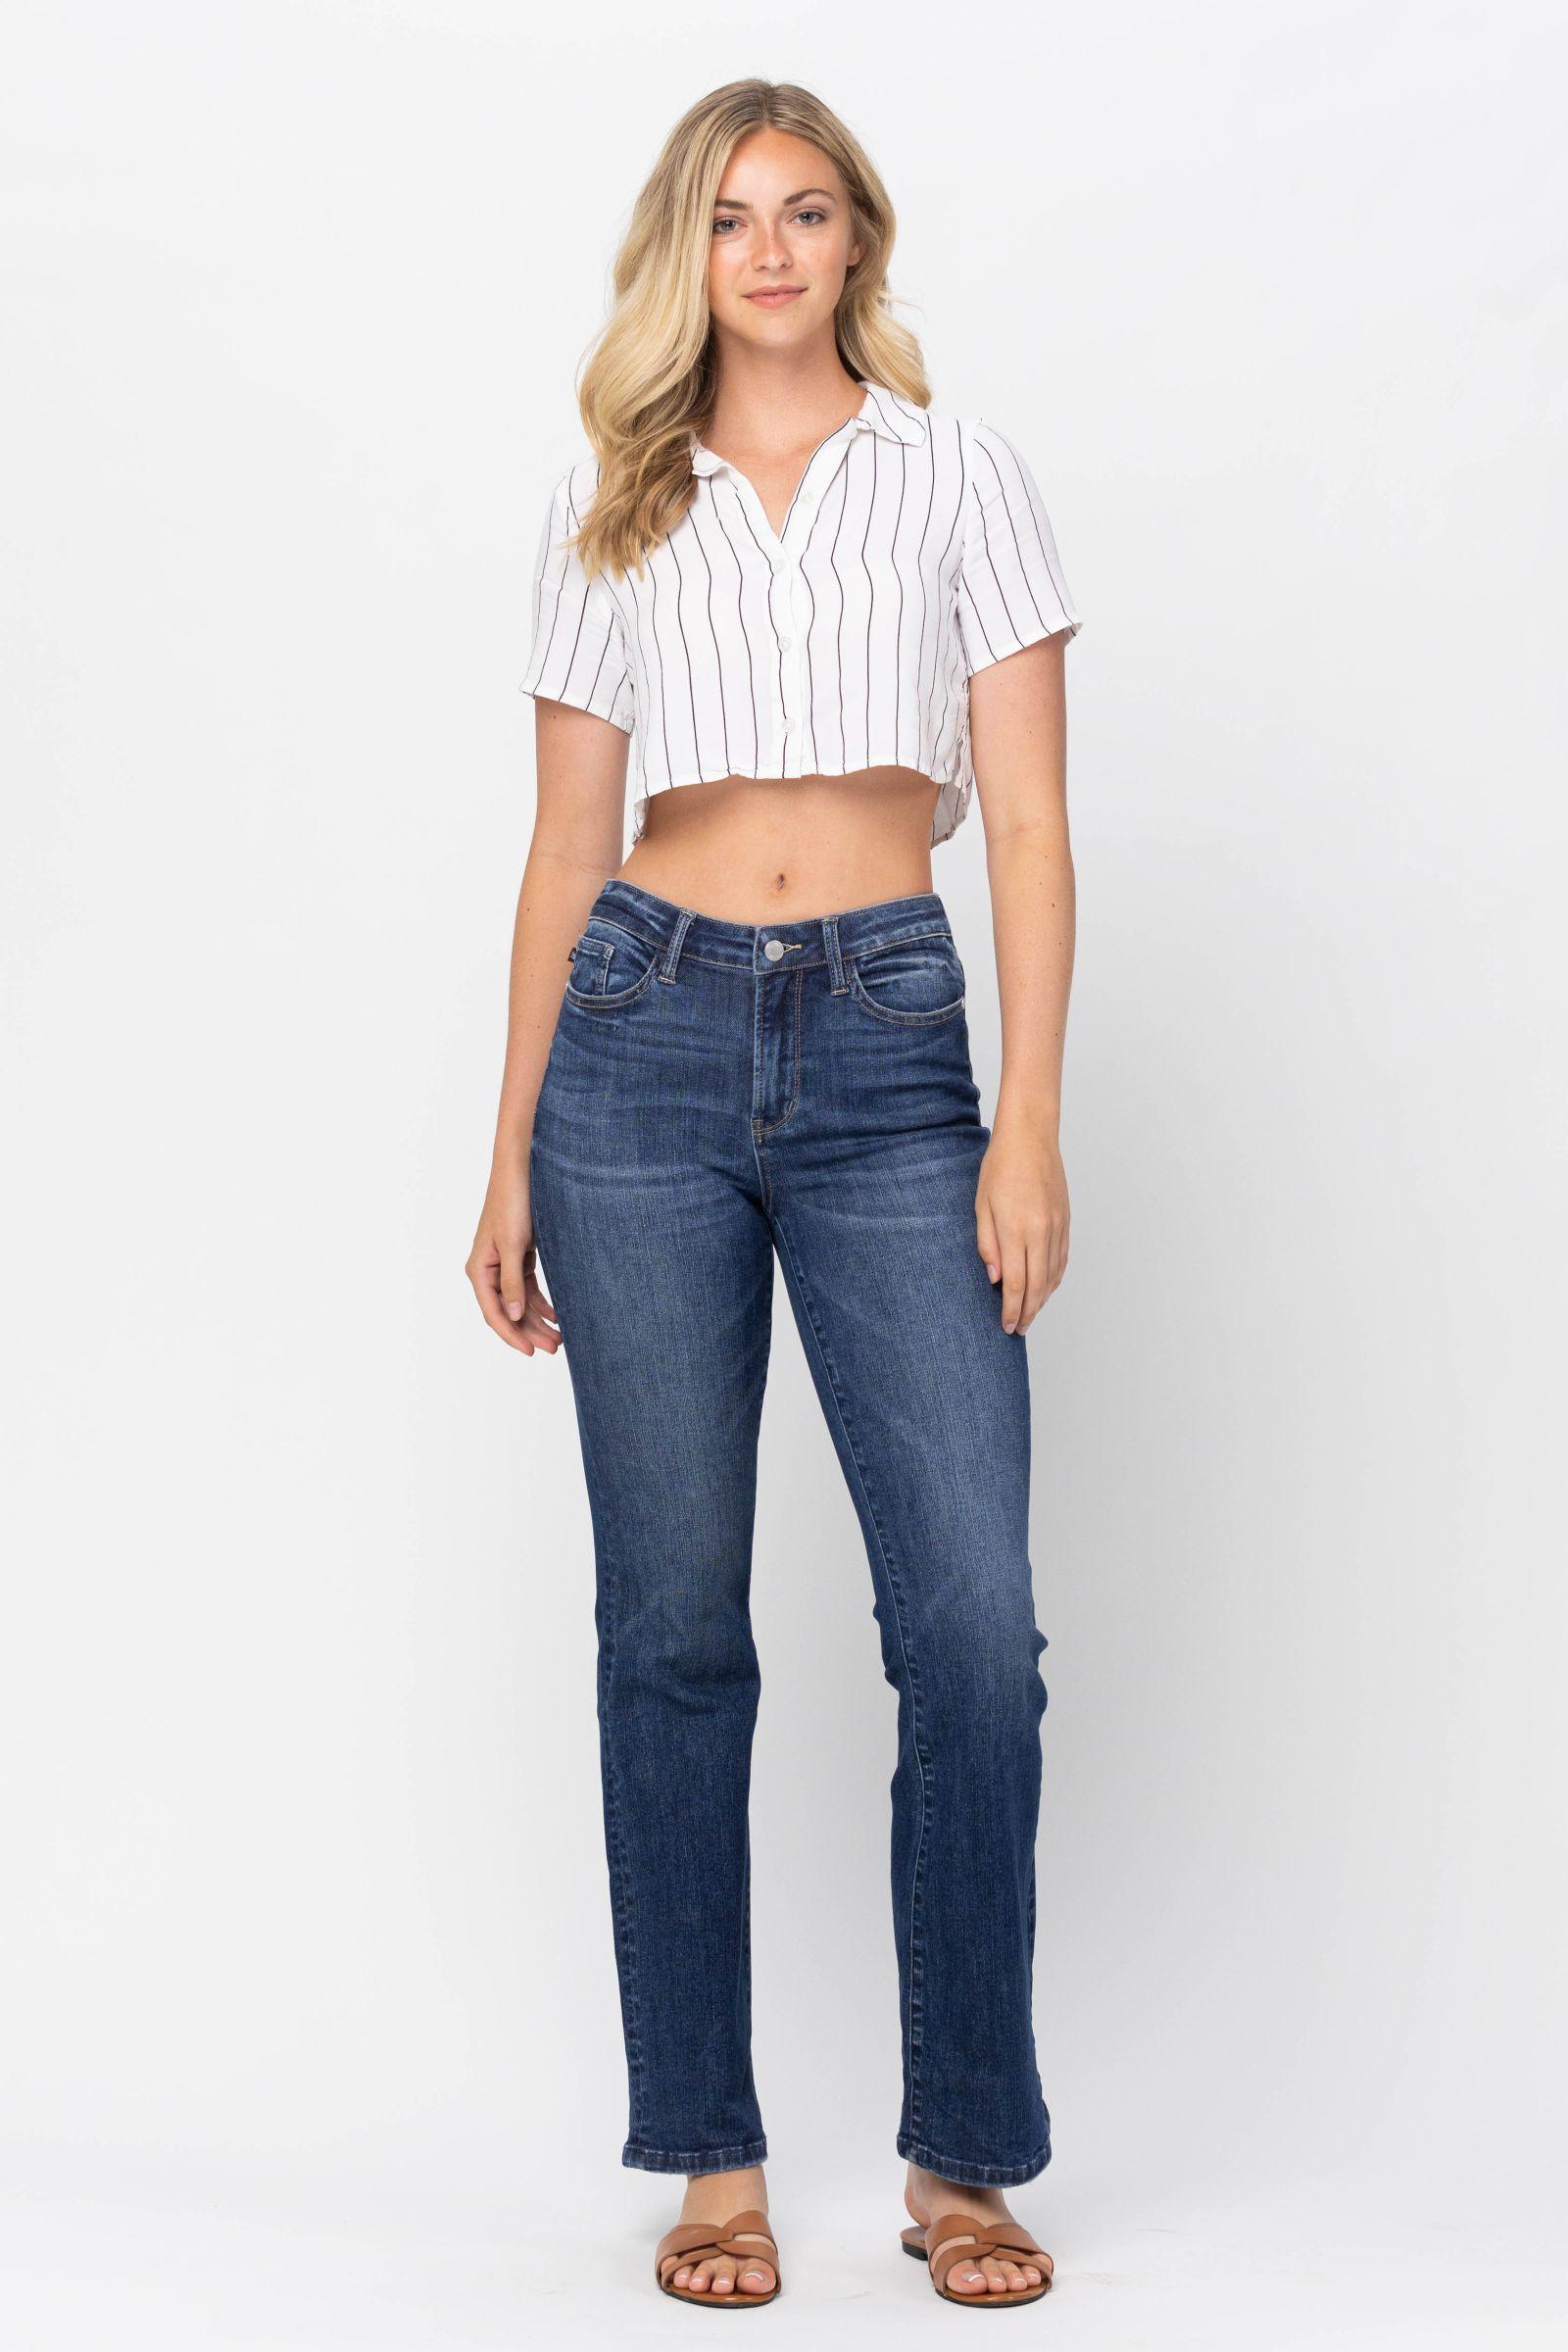 Judy Blue Midrise Bootcut Jeans - Strawberry Moon Boutique